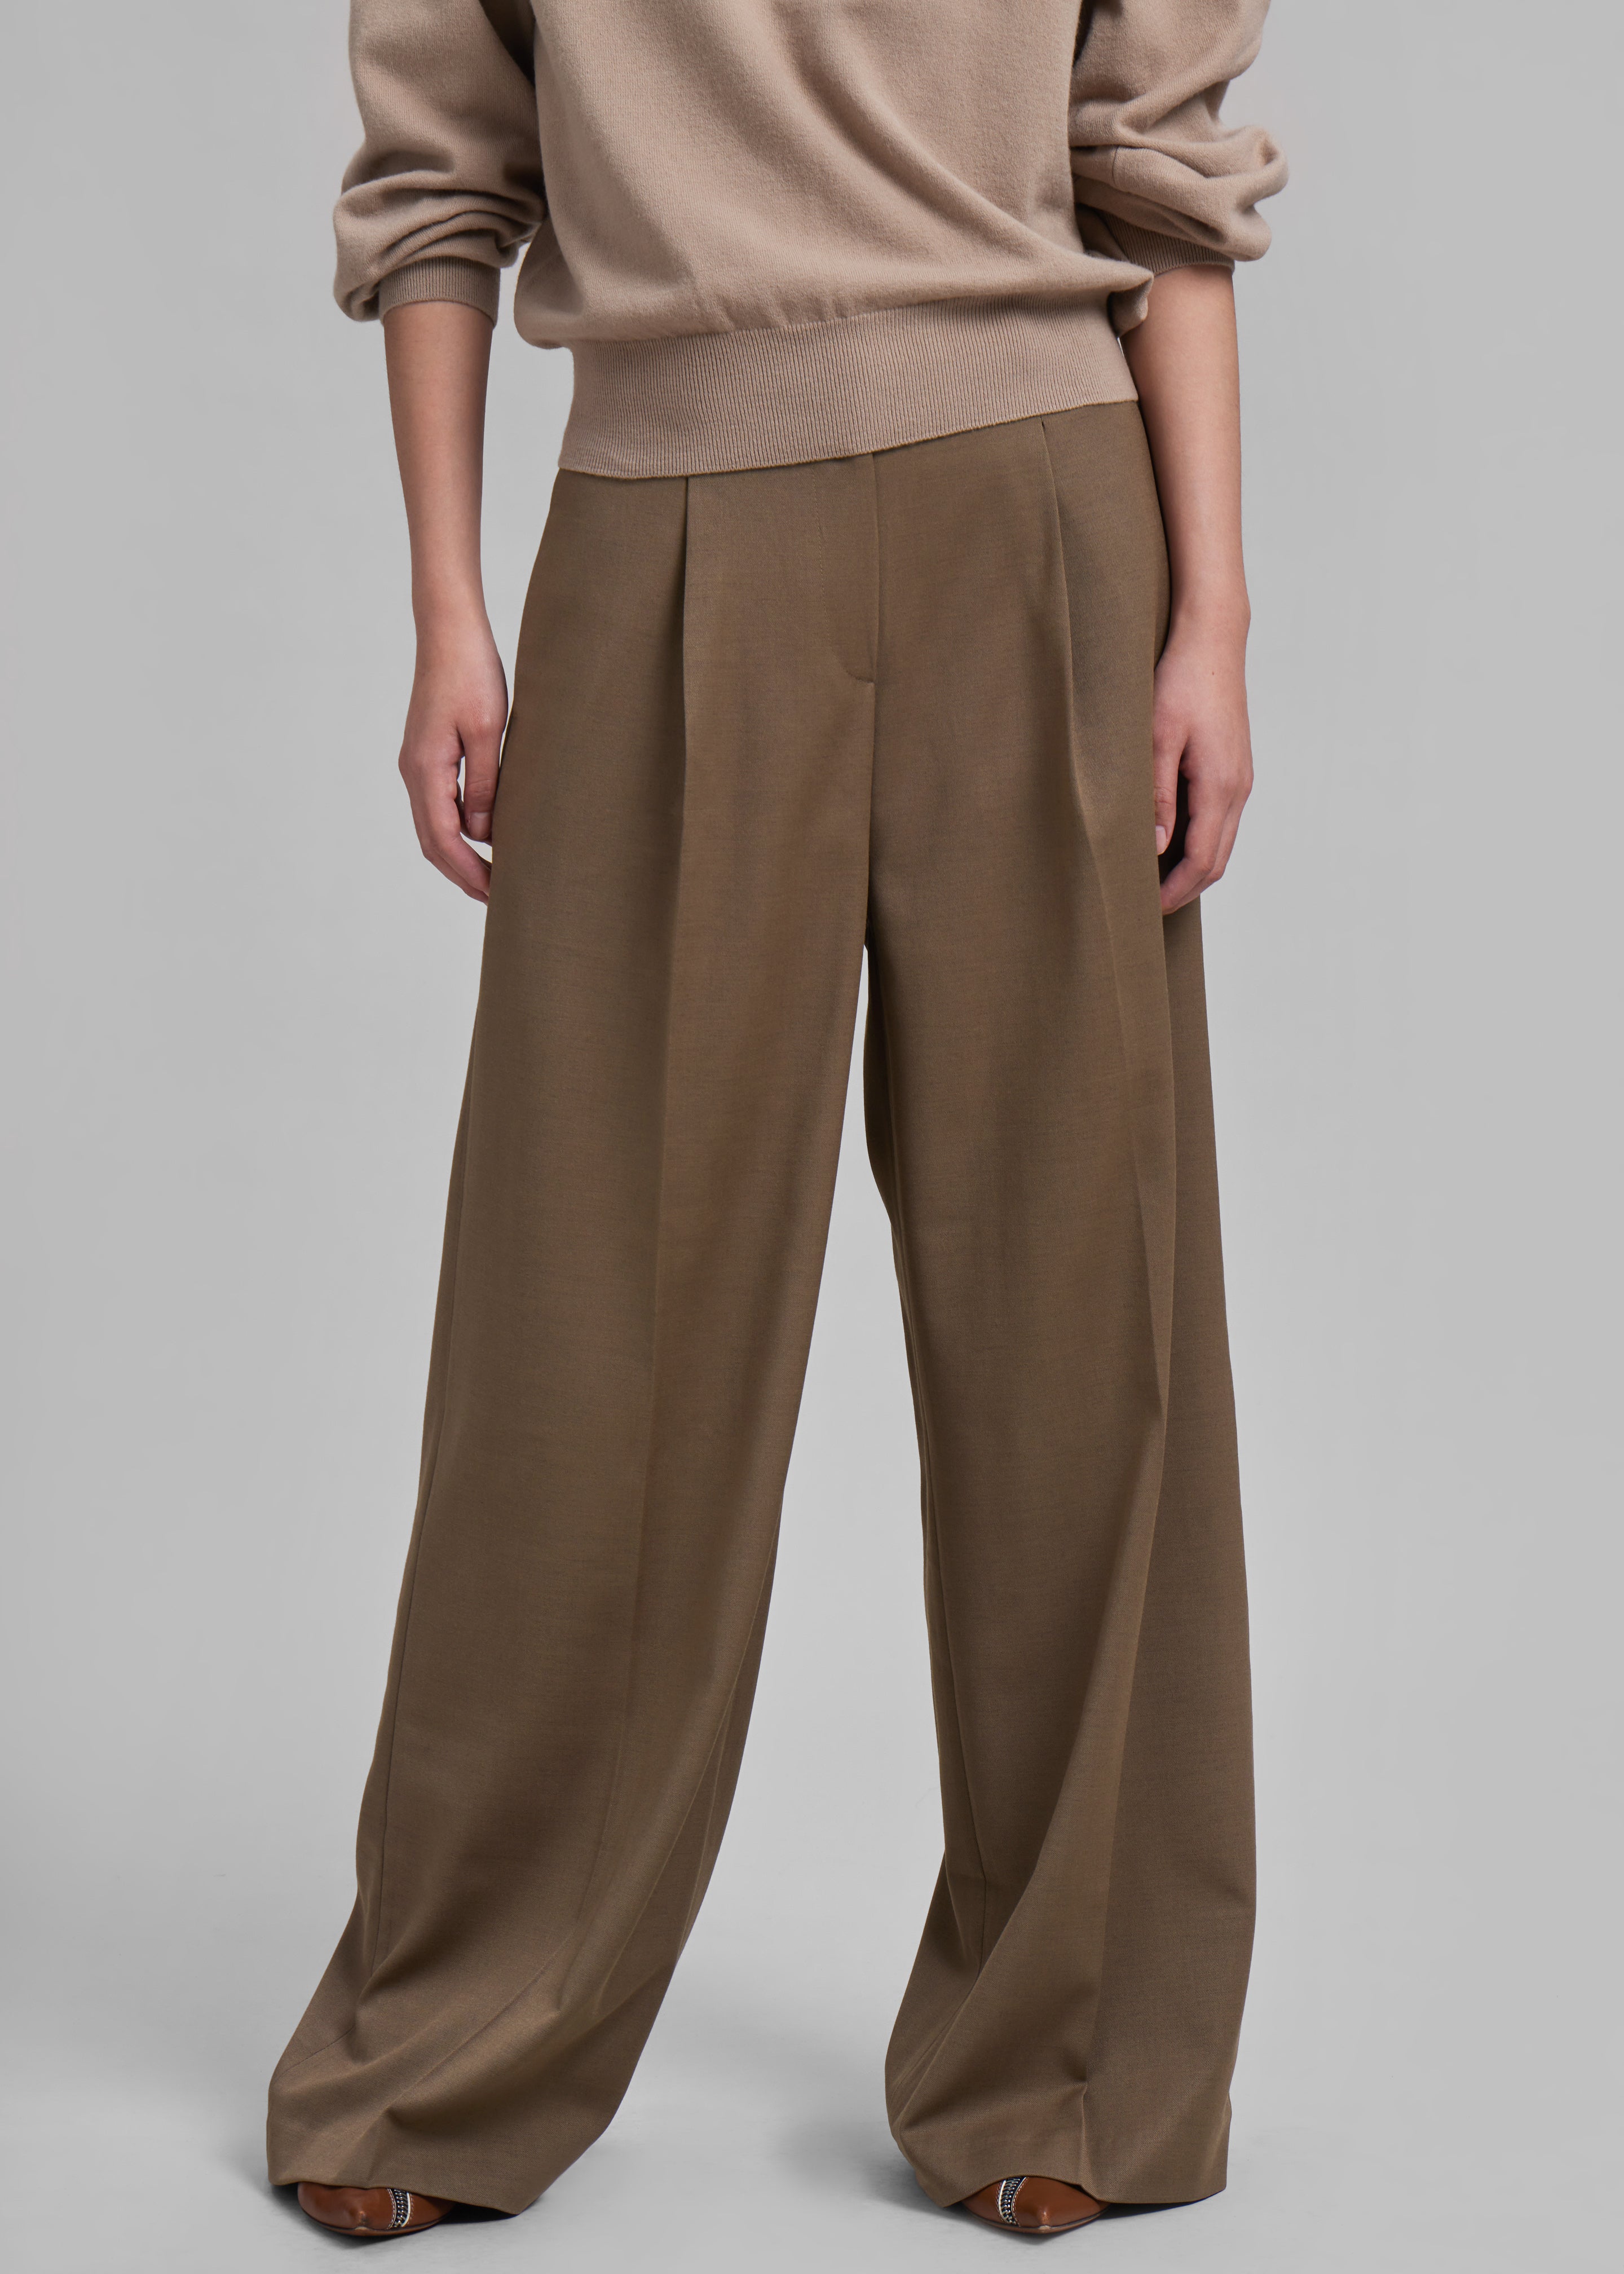 PLEATED COTTON - LINEN PANTS - taupe brown